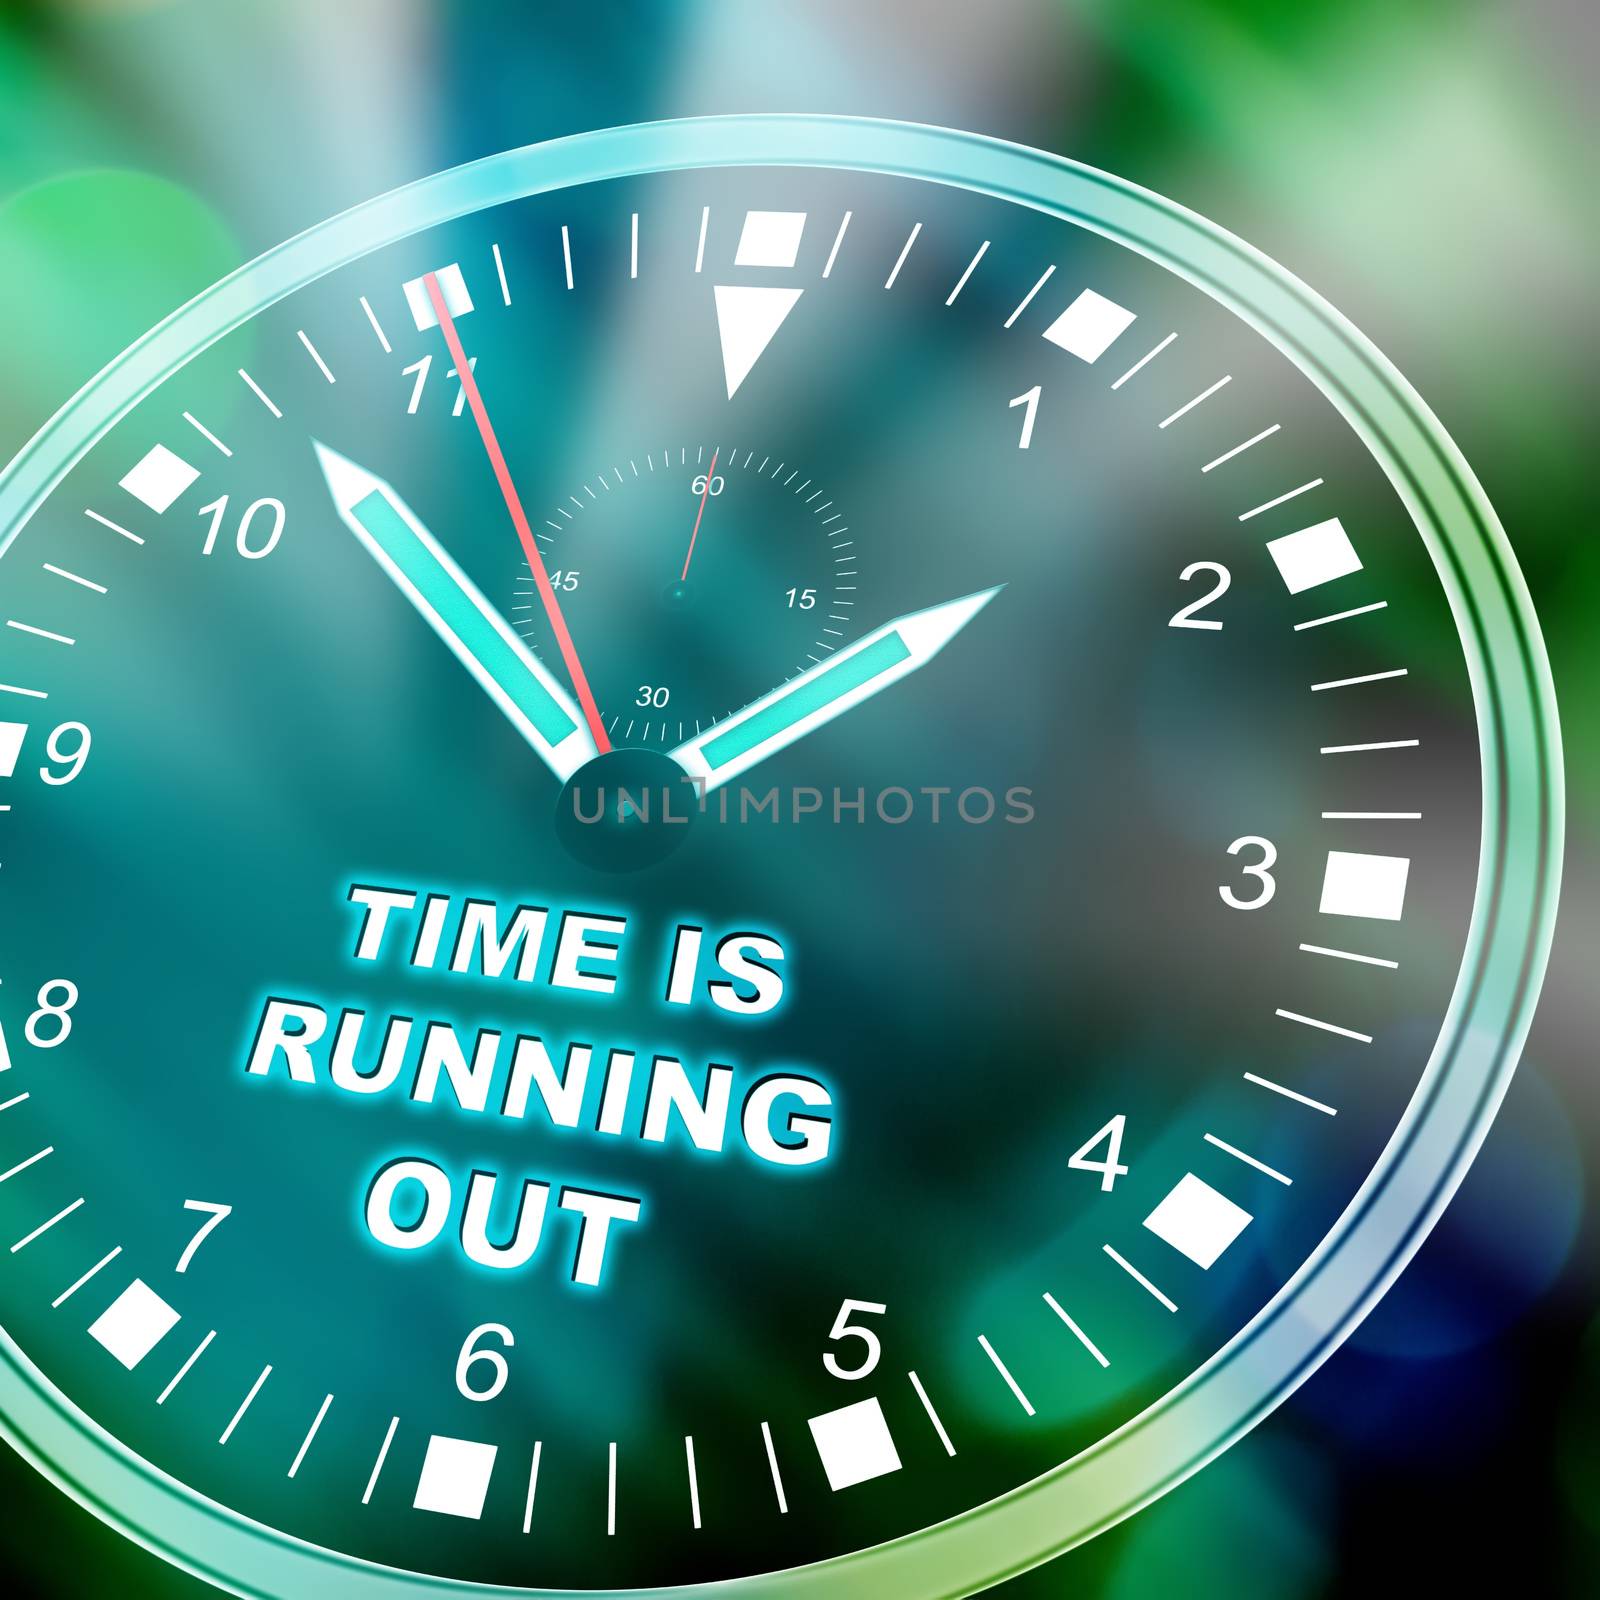 Illustration of a watch with text "TIME IS RUNNING OUT"